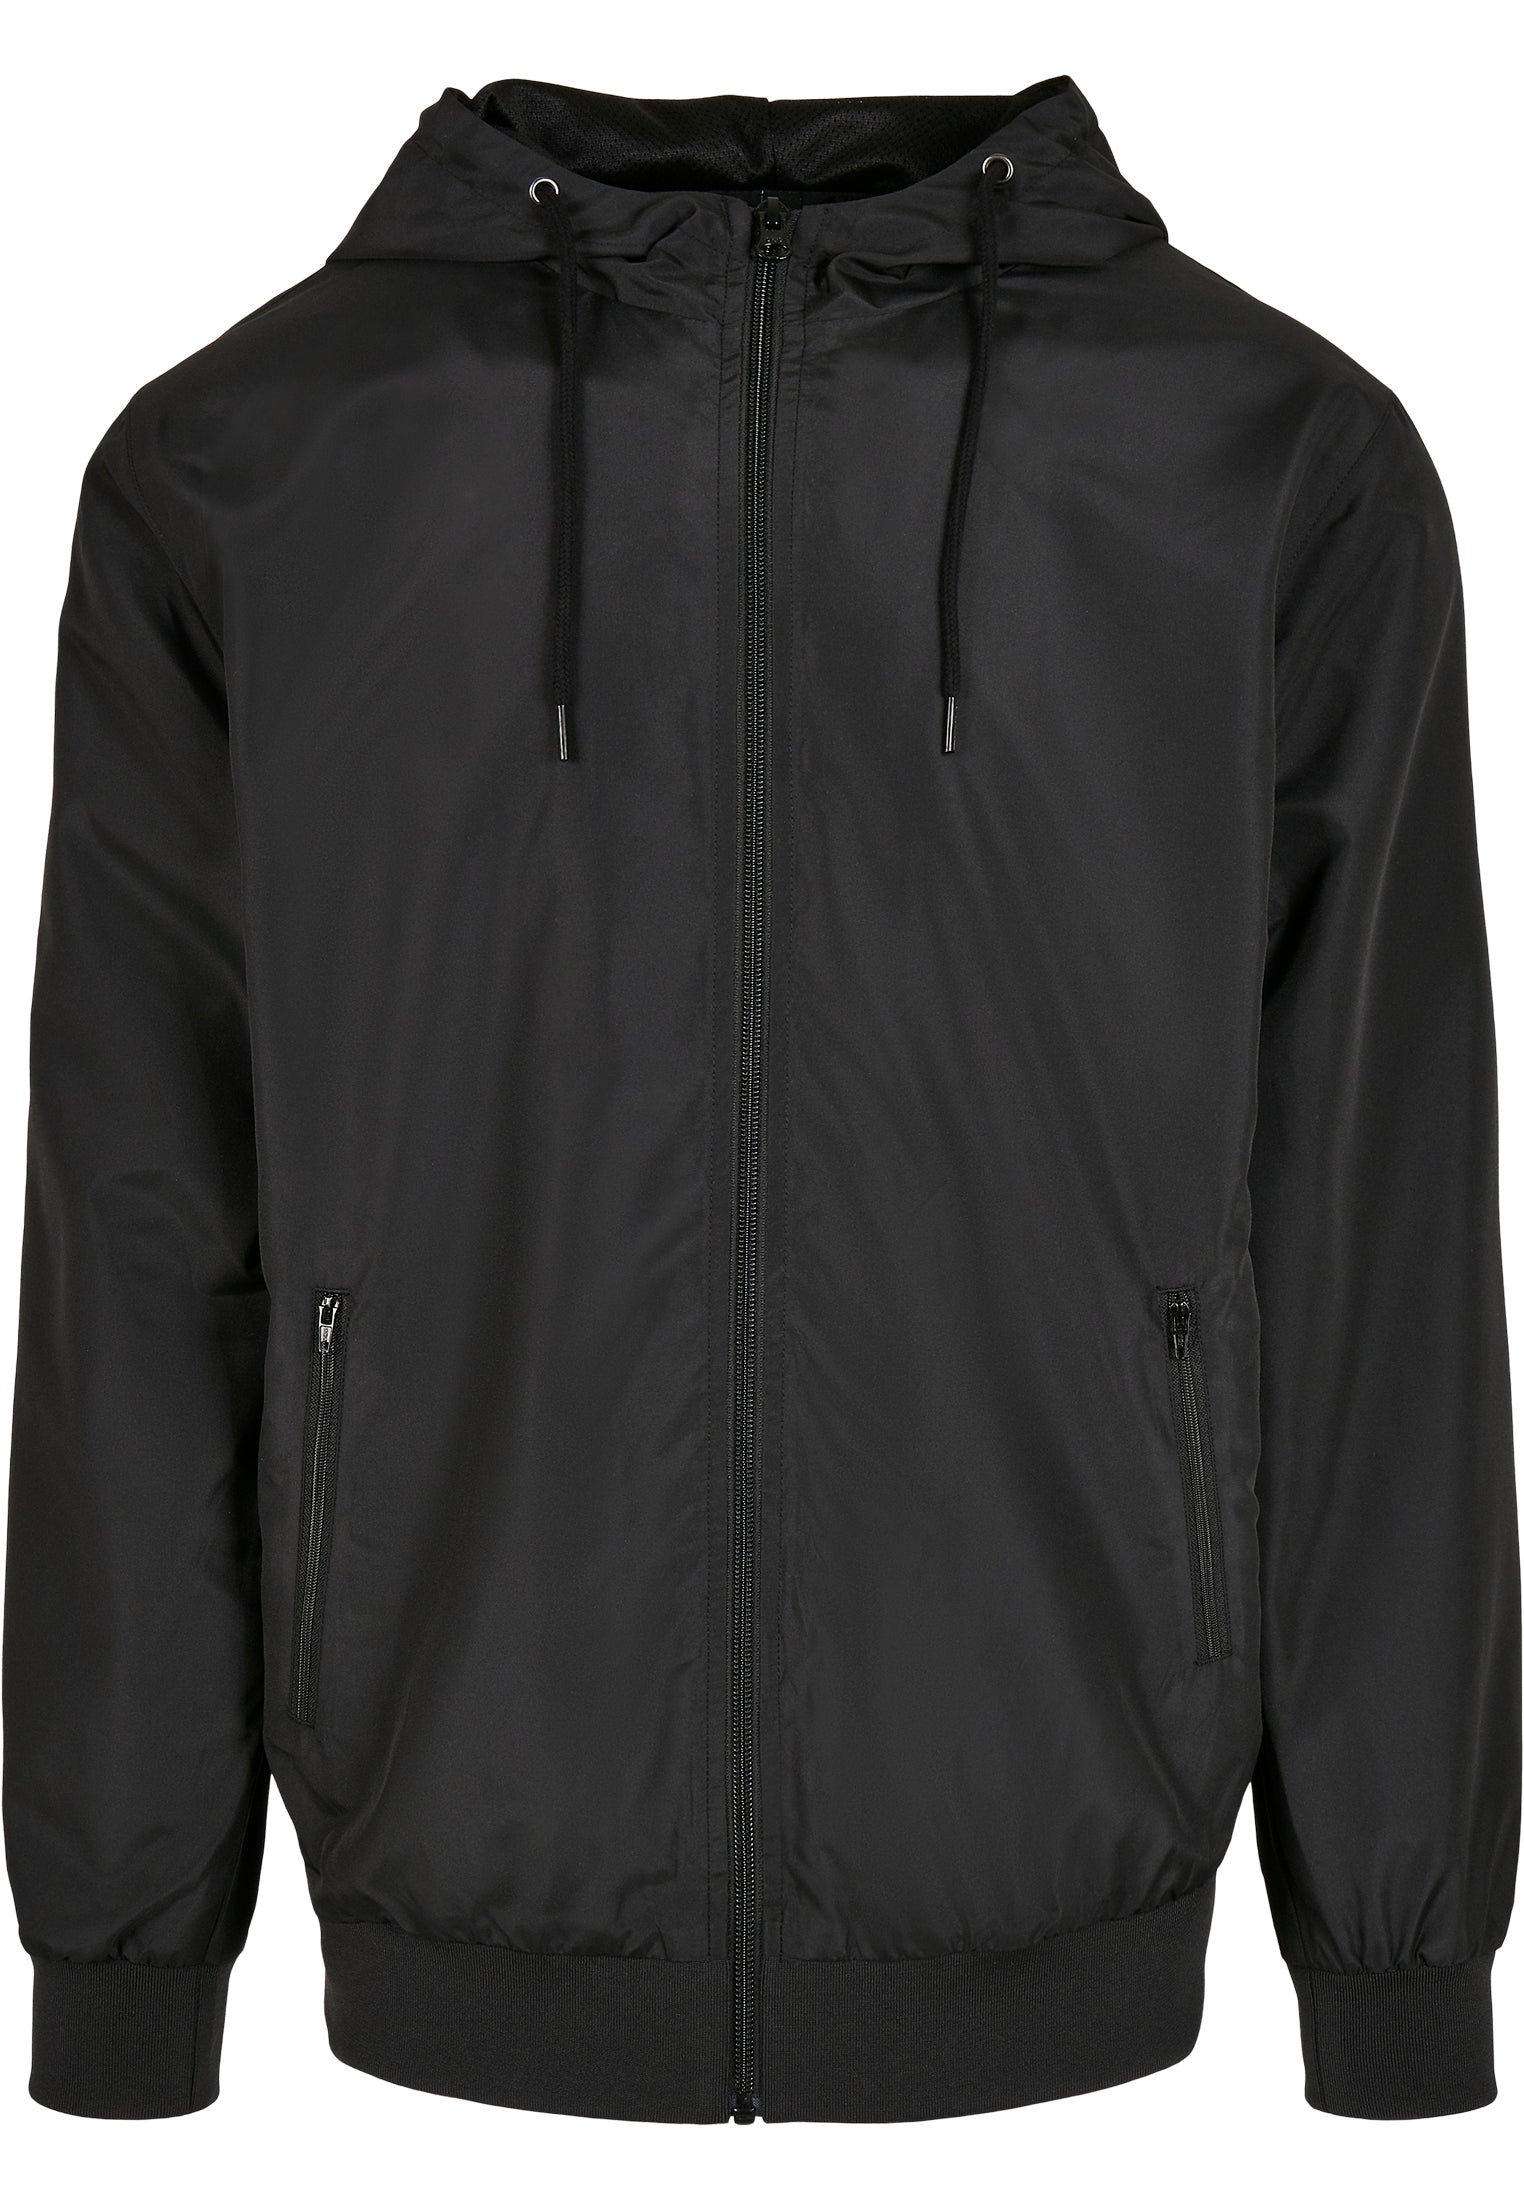 COOZO Mens Recycled Windrunner Jacket - COOZO